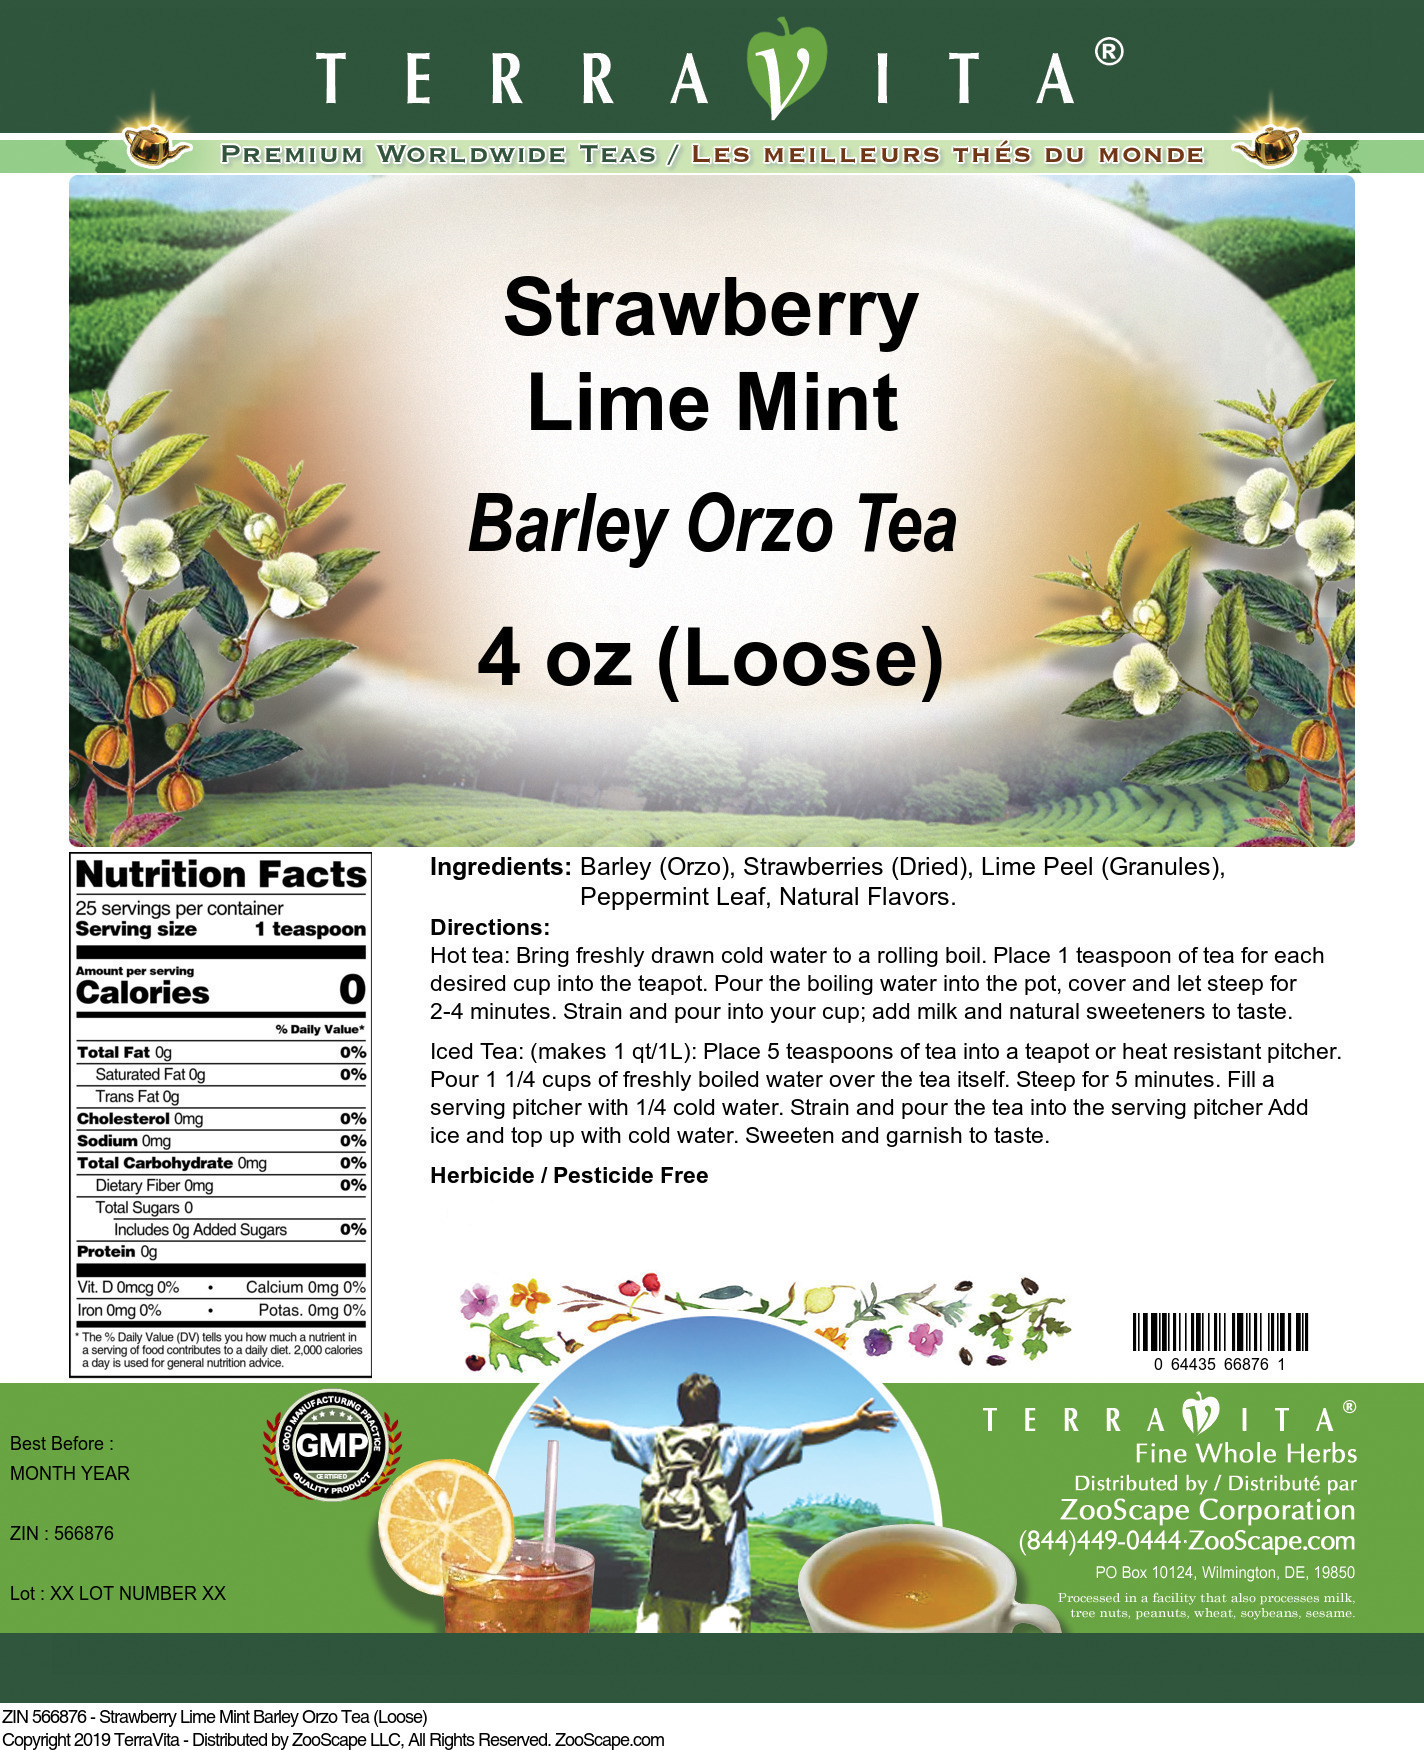 Strawberry Lime Mint Barley Orzo Tea (Loose) - Label